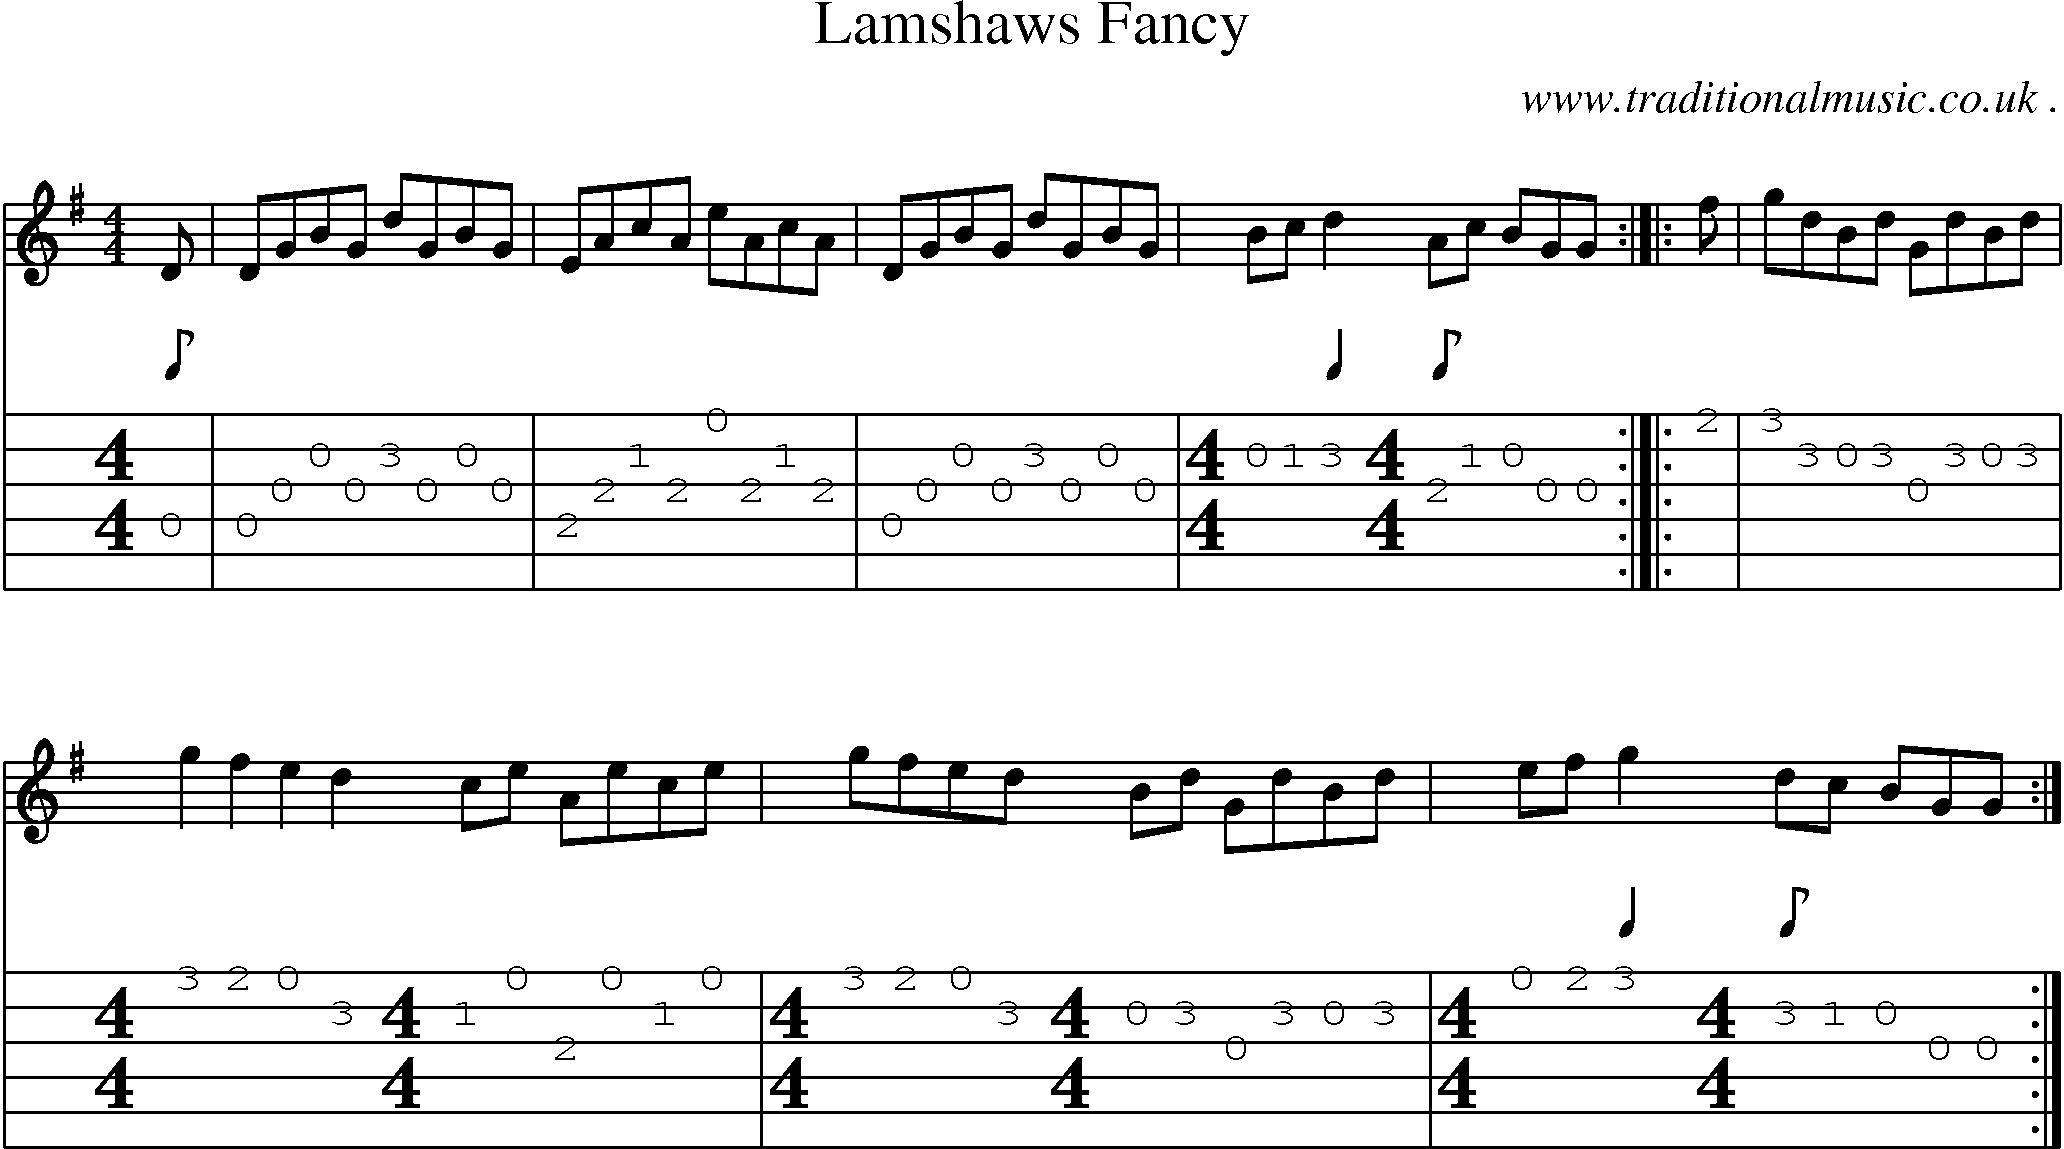 Sheet-Music and Guitar Tabs for Lamshaws Fancy